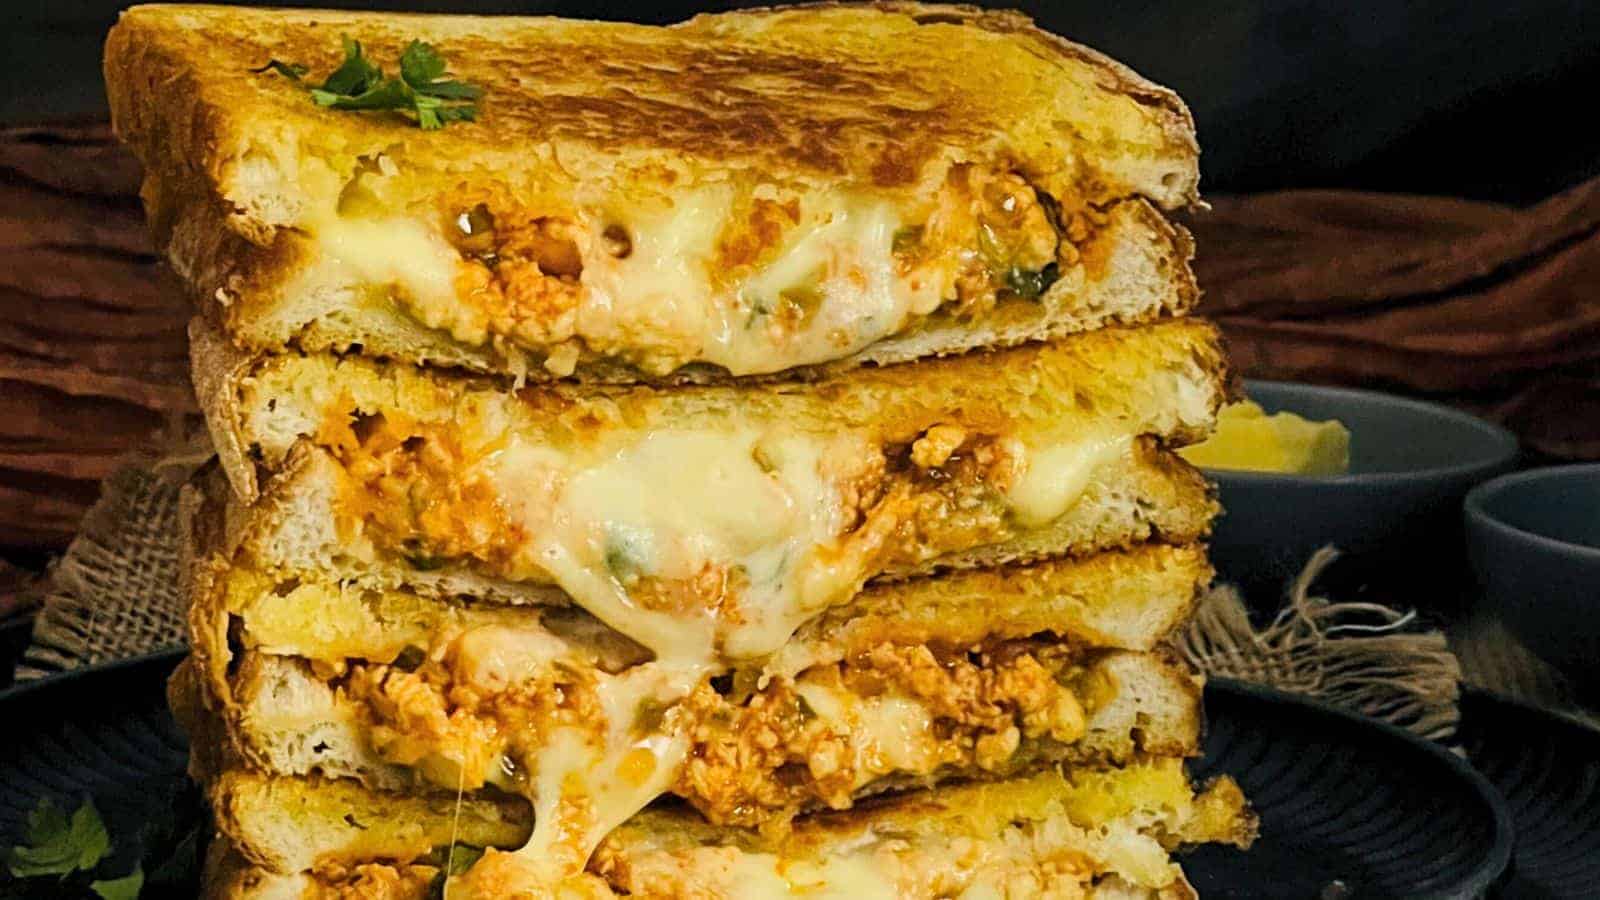 A Paneer Sandwich with melted cheese stretching between two halves, filled with a spicy minced meat mixture, served on a dark plate.